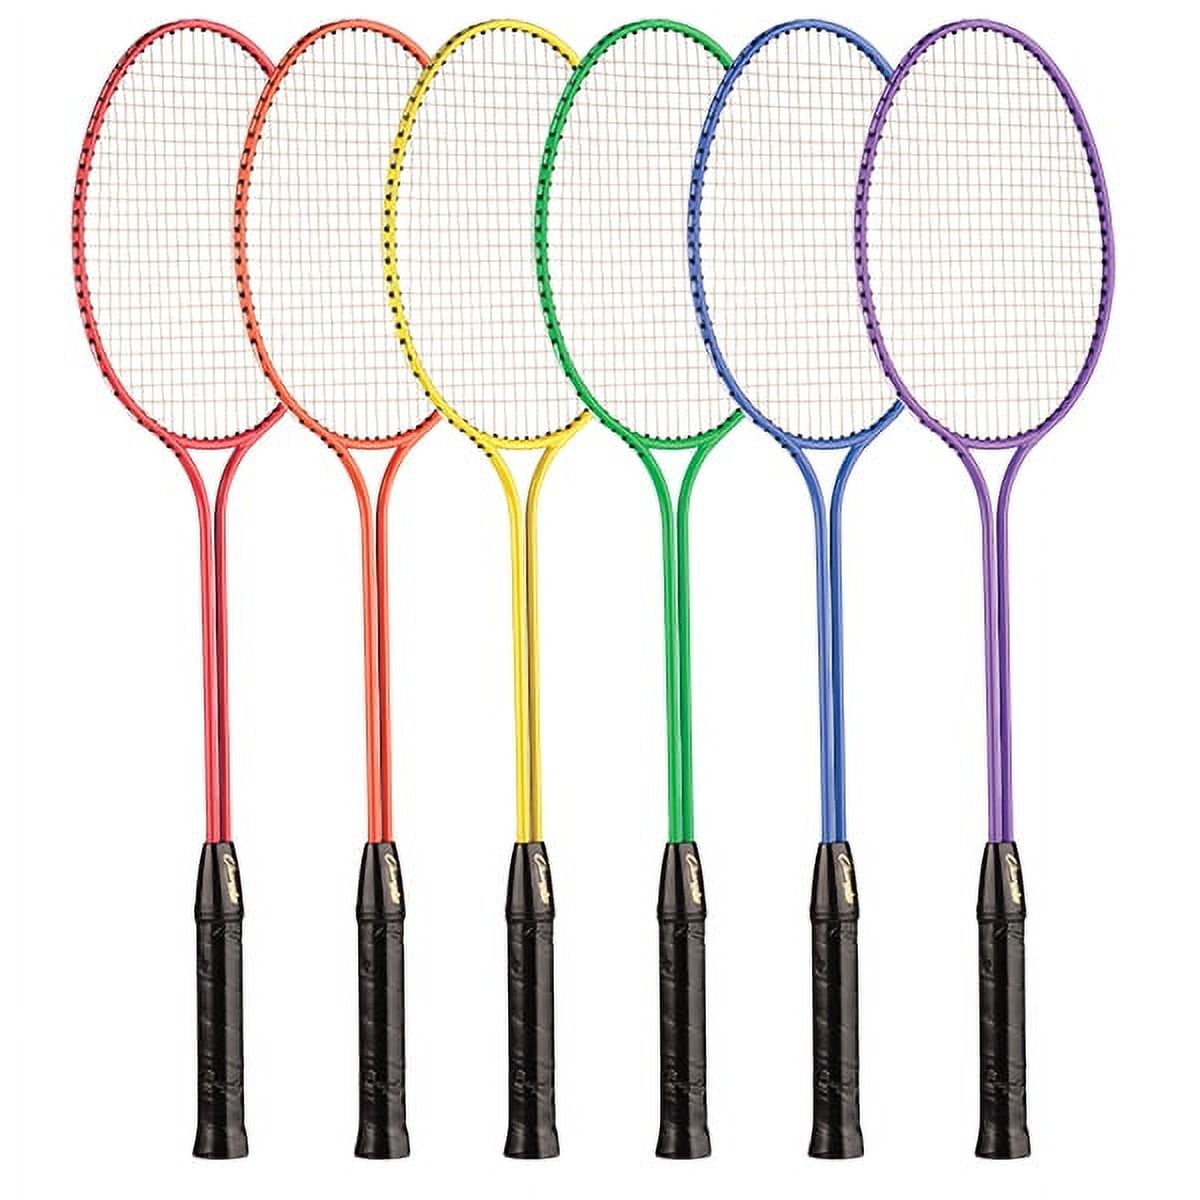 Champion Sports 26 x 8 x 1 in. All Steel Frame Badminton Racket&#44; Assorted Colors